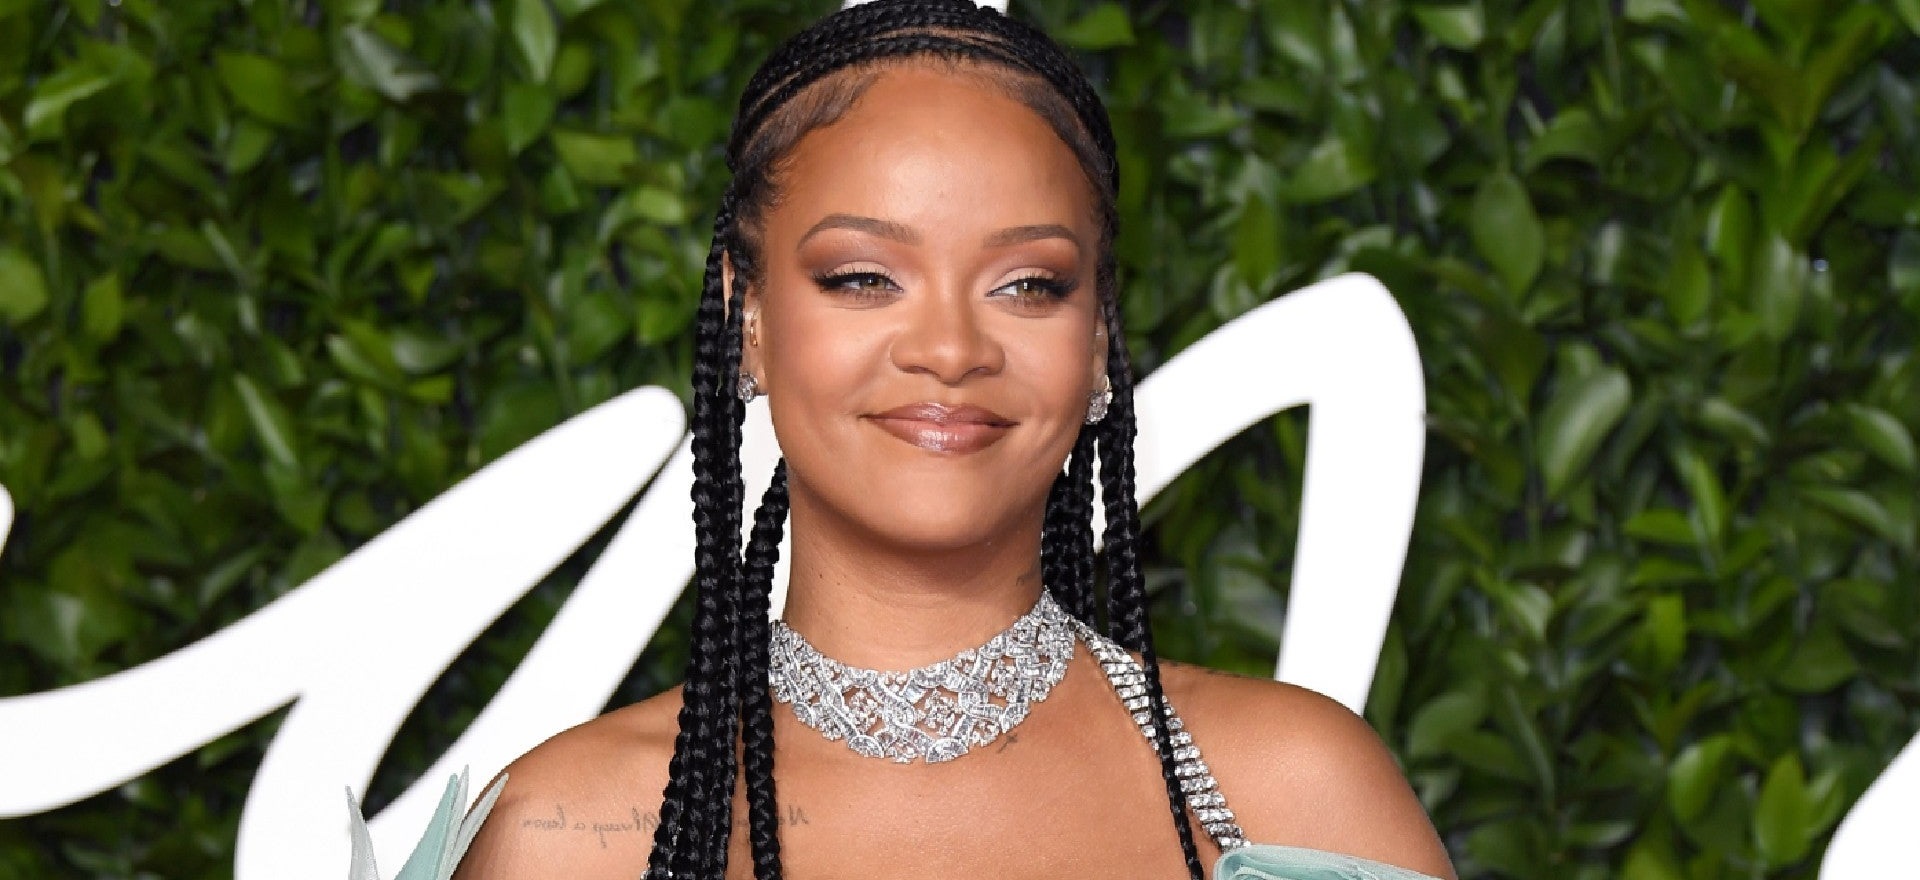 While Fans Await For an Album… Rihanna Prepares To Release a Cookbook